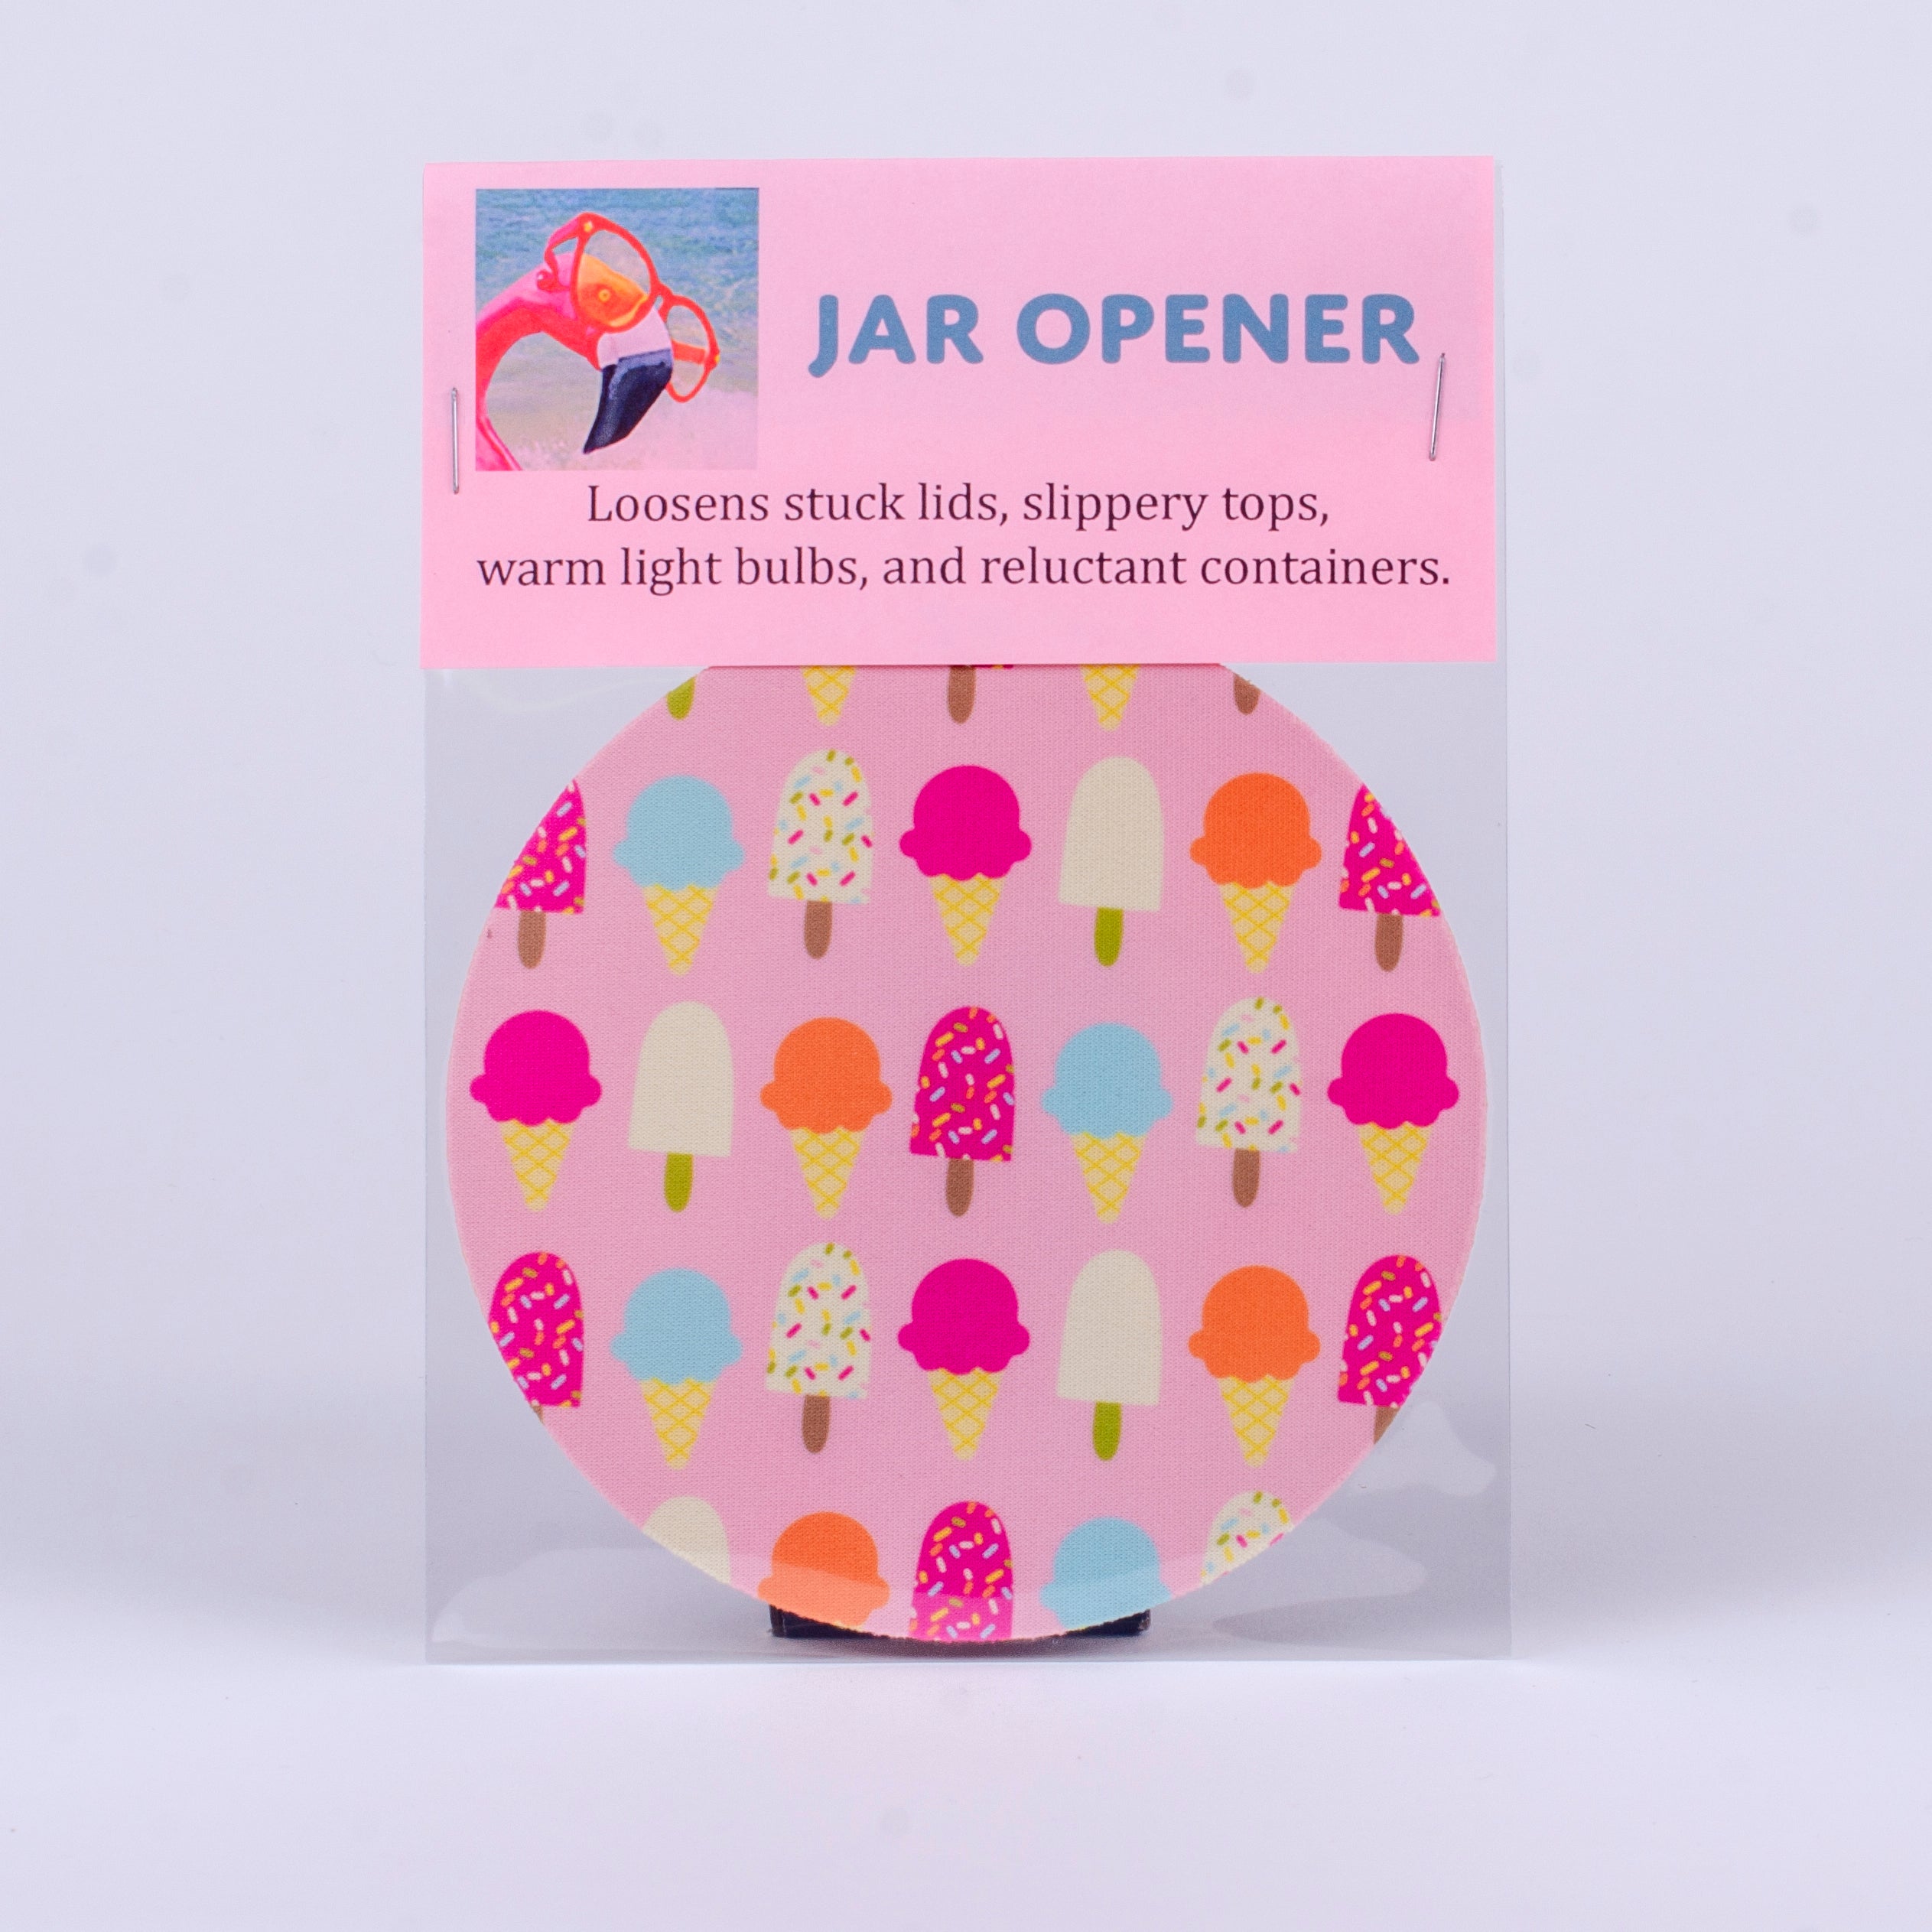 Rubber Jar Opener with Ice Cream Images